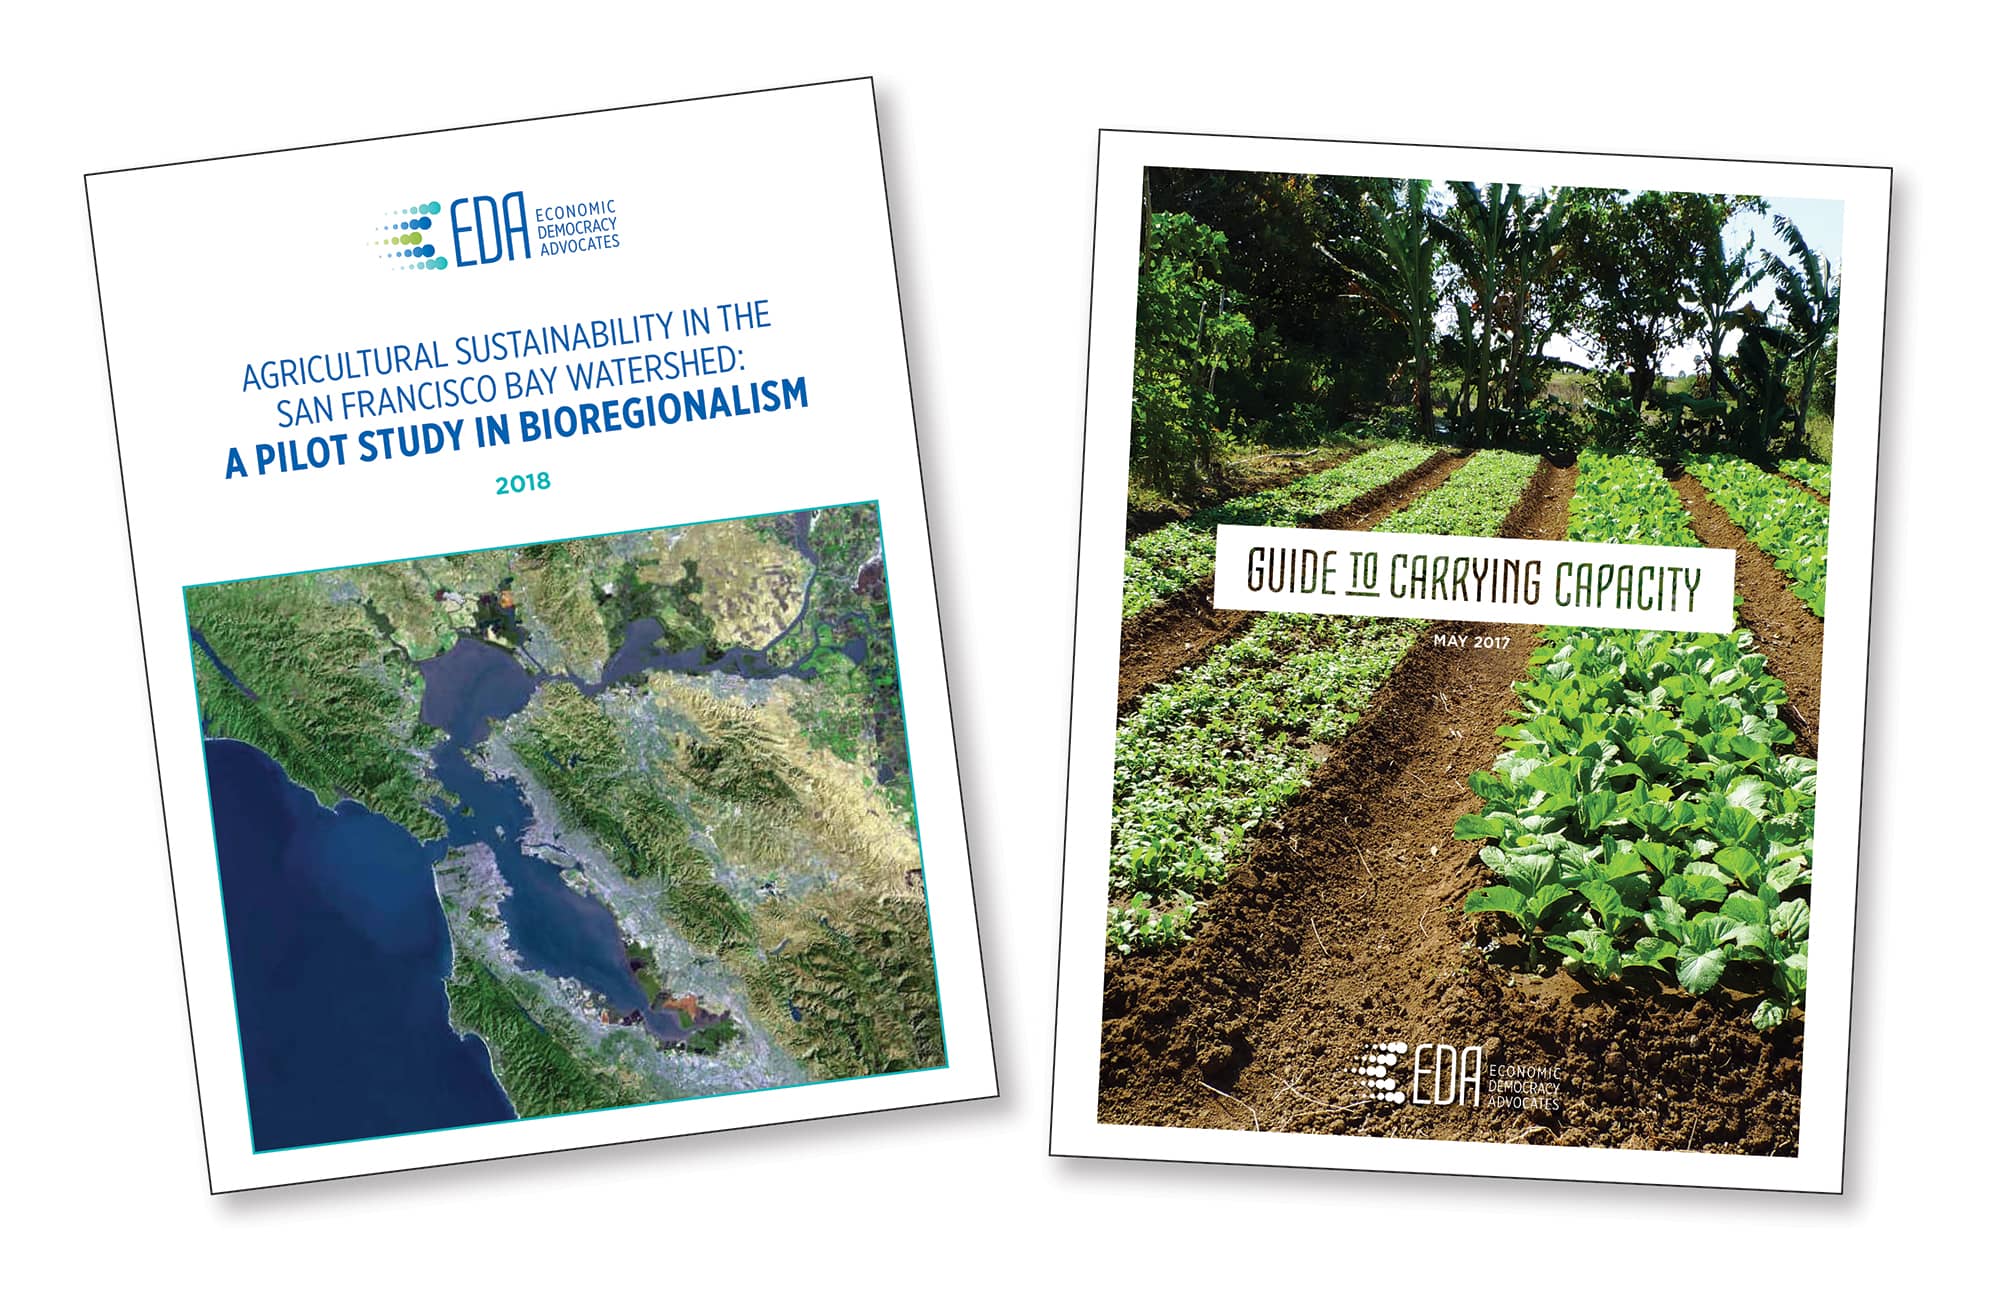 EDA report covers read, "Agricultural Sustainability in the San Francisco Bay watershed: A Pilot Study in Bioregionalism" and "Guide to Carrying Capacity"